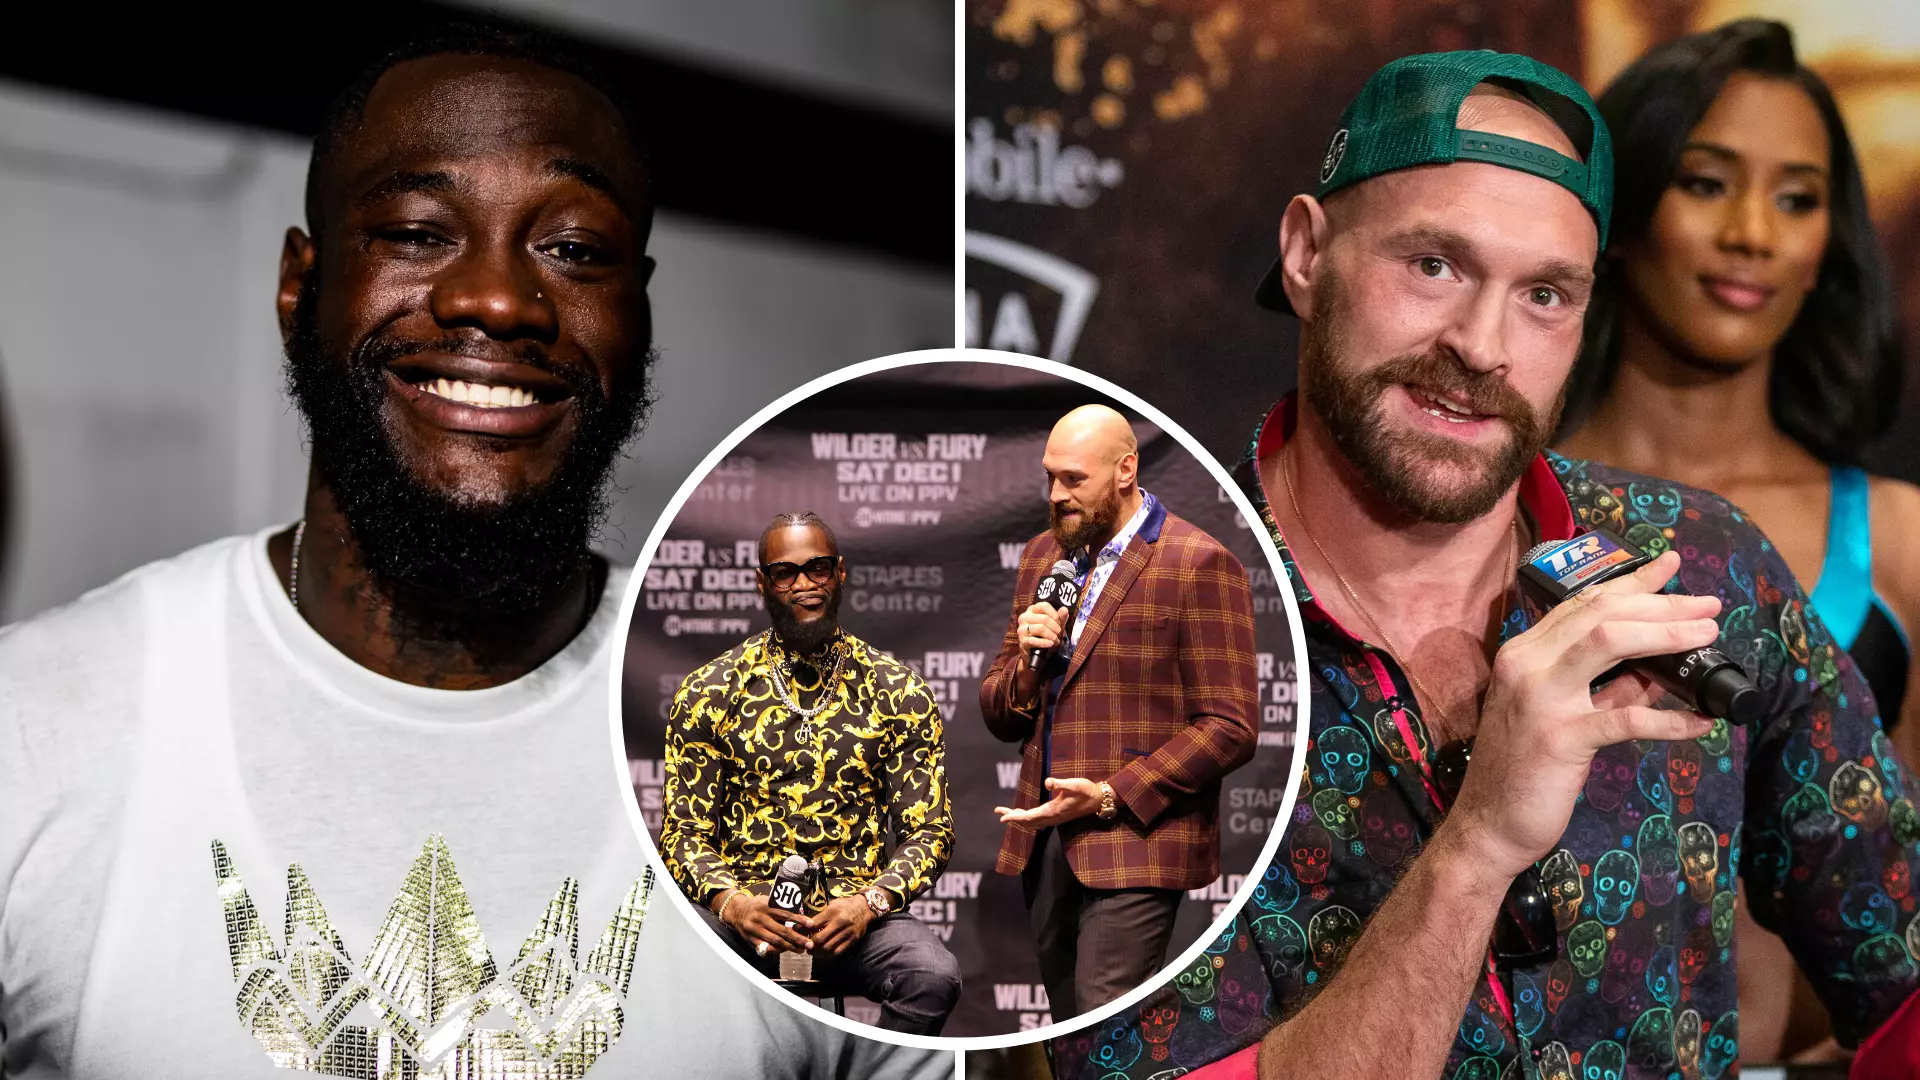 Tyson Fury Shows Off His Bulked-Up Physique As He Vows To KO Deontay Wilder